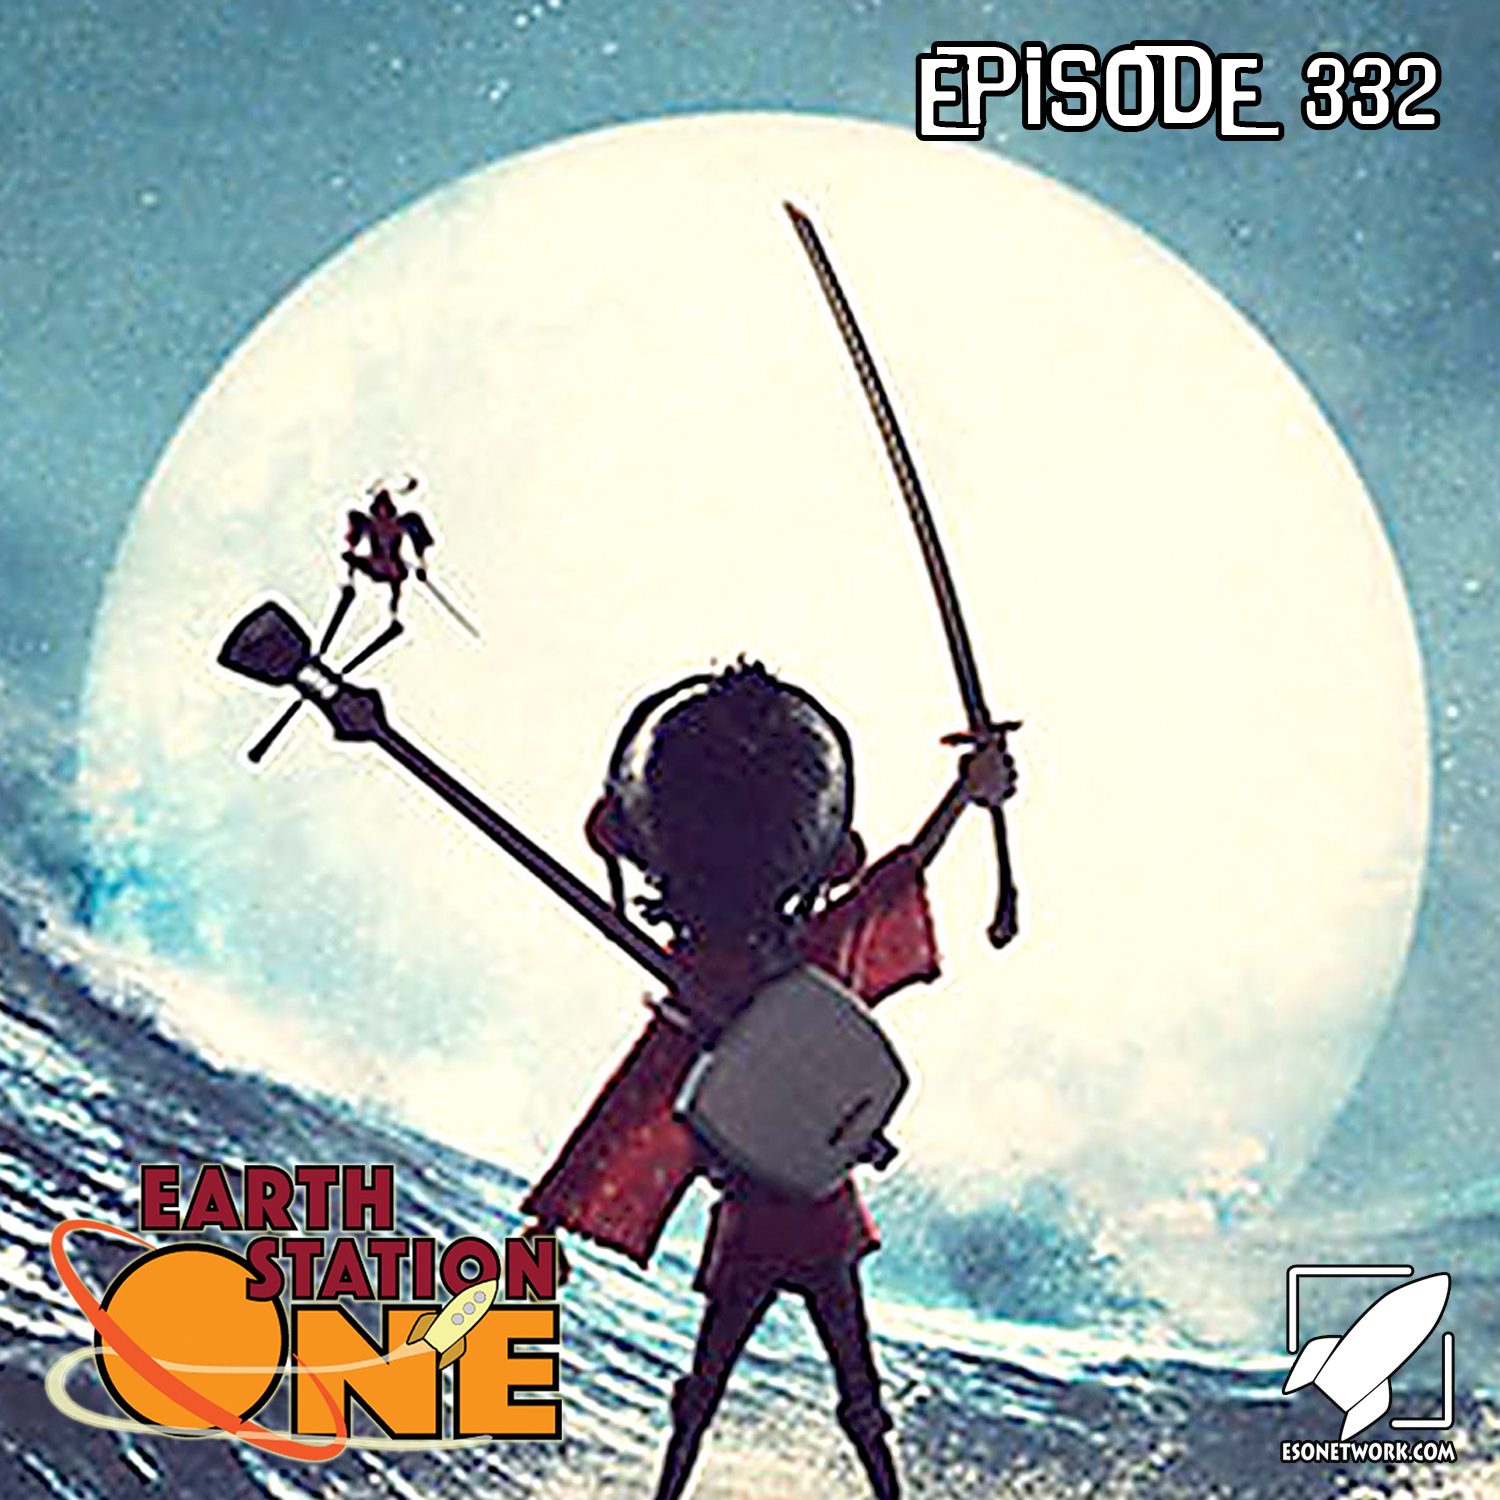 Earth Station One Ep 332